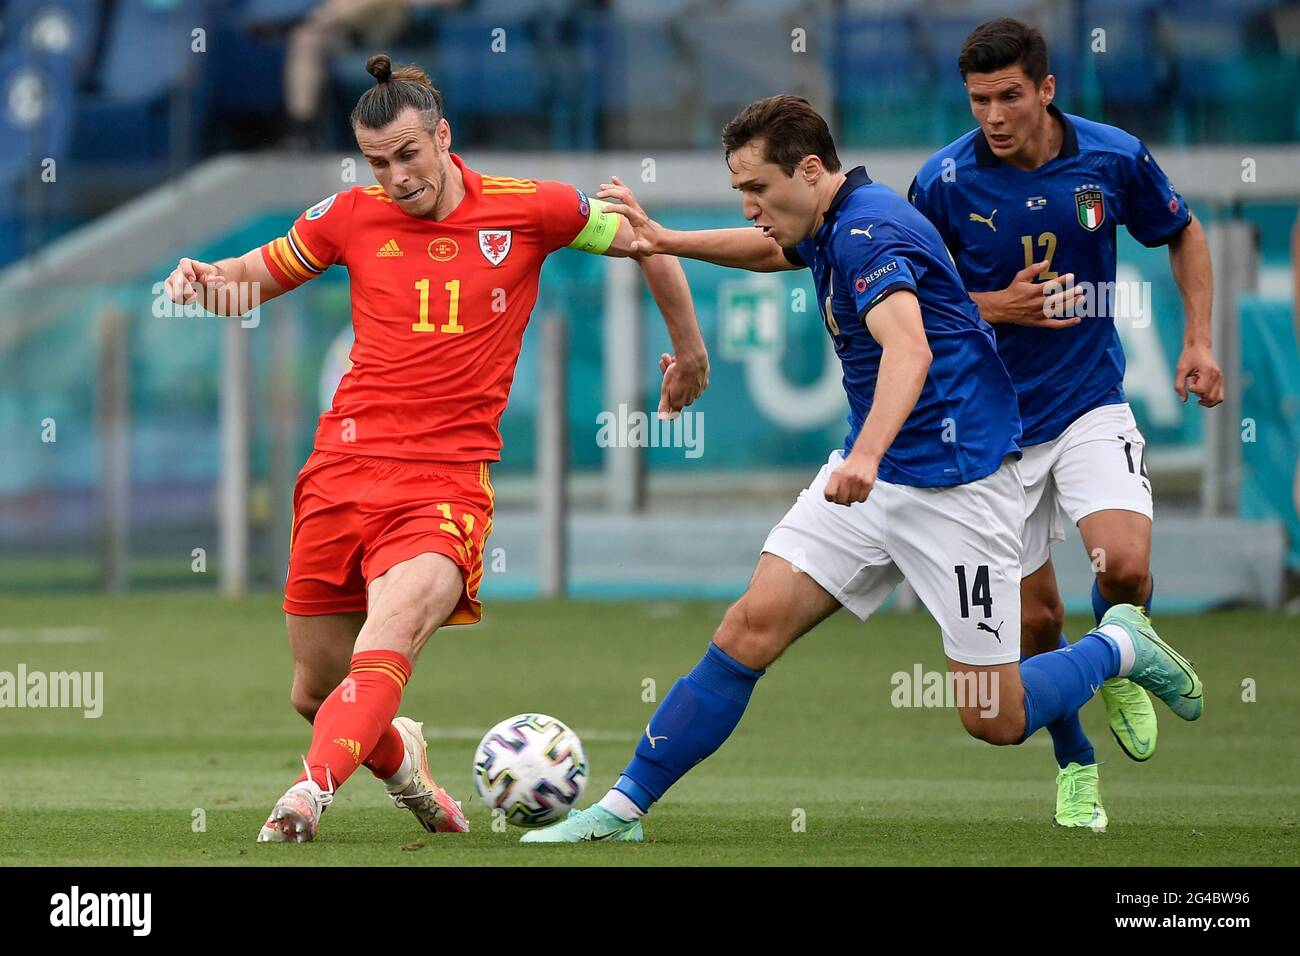 Roma, Italy. 20th June, 2021. Gareth Bale of Wales and Federico Chiesa of Italy compete for the ball during the Uefa Euro 2020 Group A football match between Italy and Wales at stadio Olimpico in Rome (Italy), June 20th, 2021. Photo Andrea Staccioli/Insidefoto Credit: insidefoto srl/Alamy Live News Stock Photo